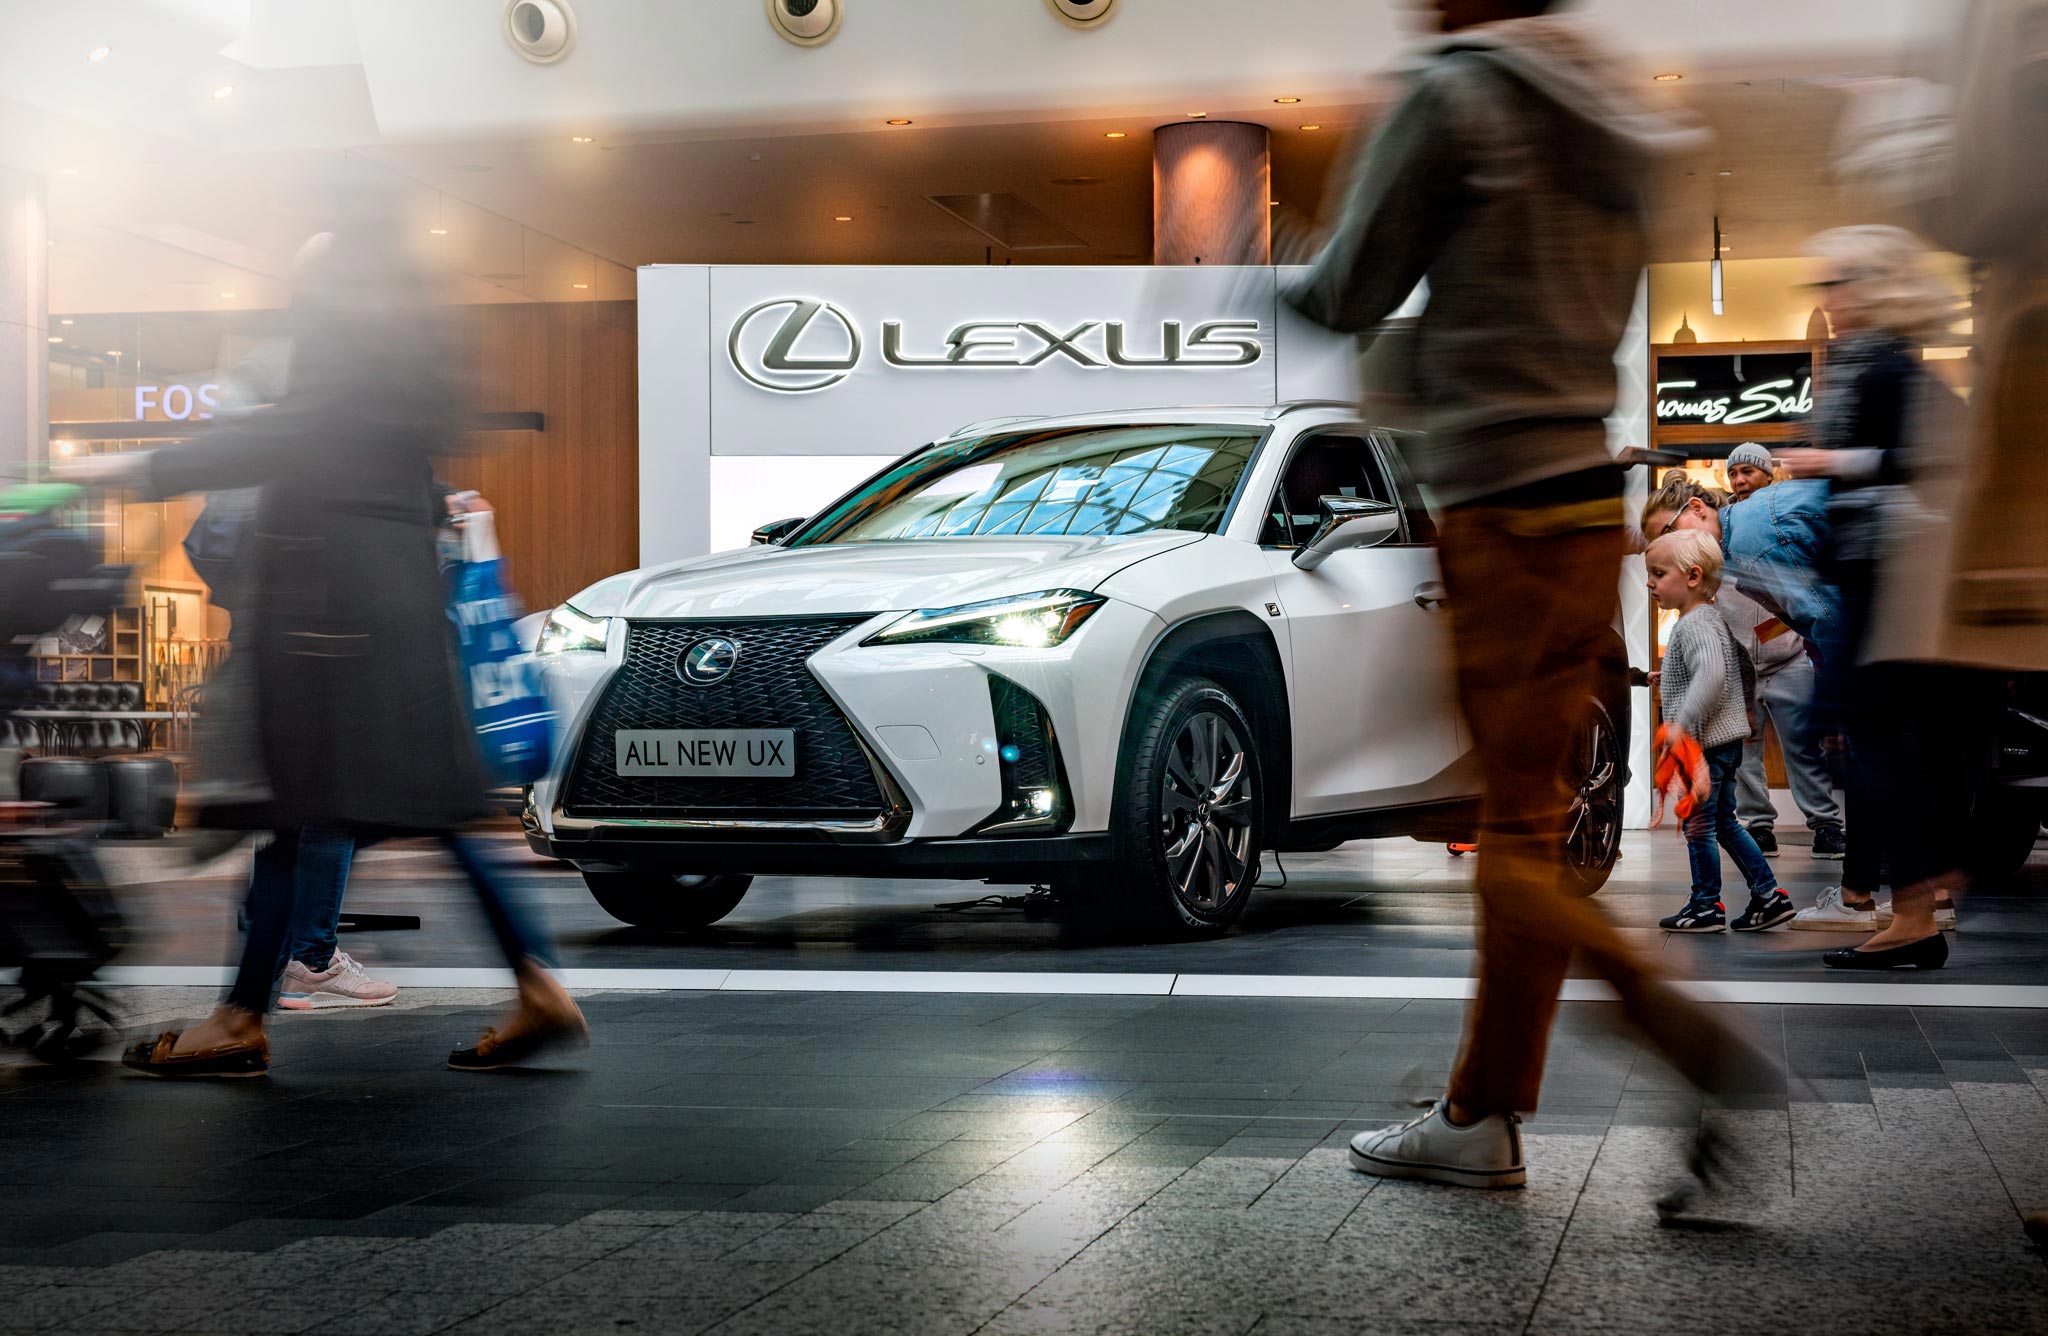 A captivating slow shutter speed image captures the bustling activity at a Lexus stand in a busy high-end shopping center in London. The focal point is a pristine white Lexus car, surrounded by people exploring the exhibit.